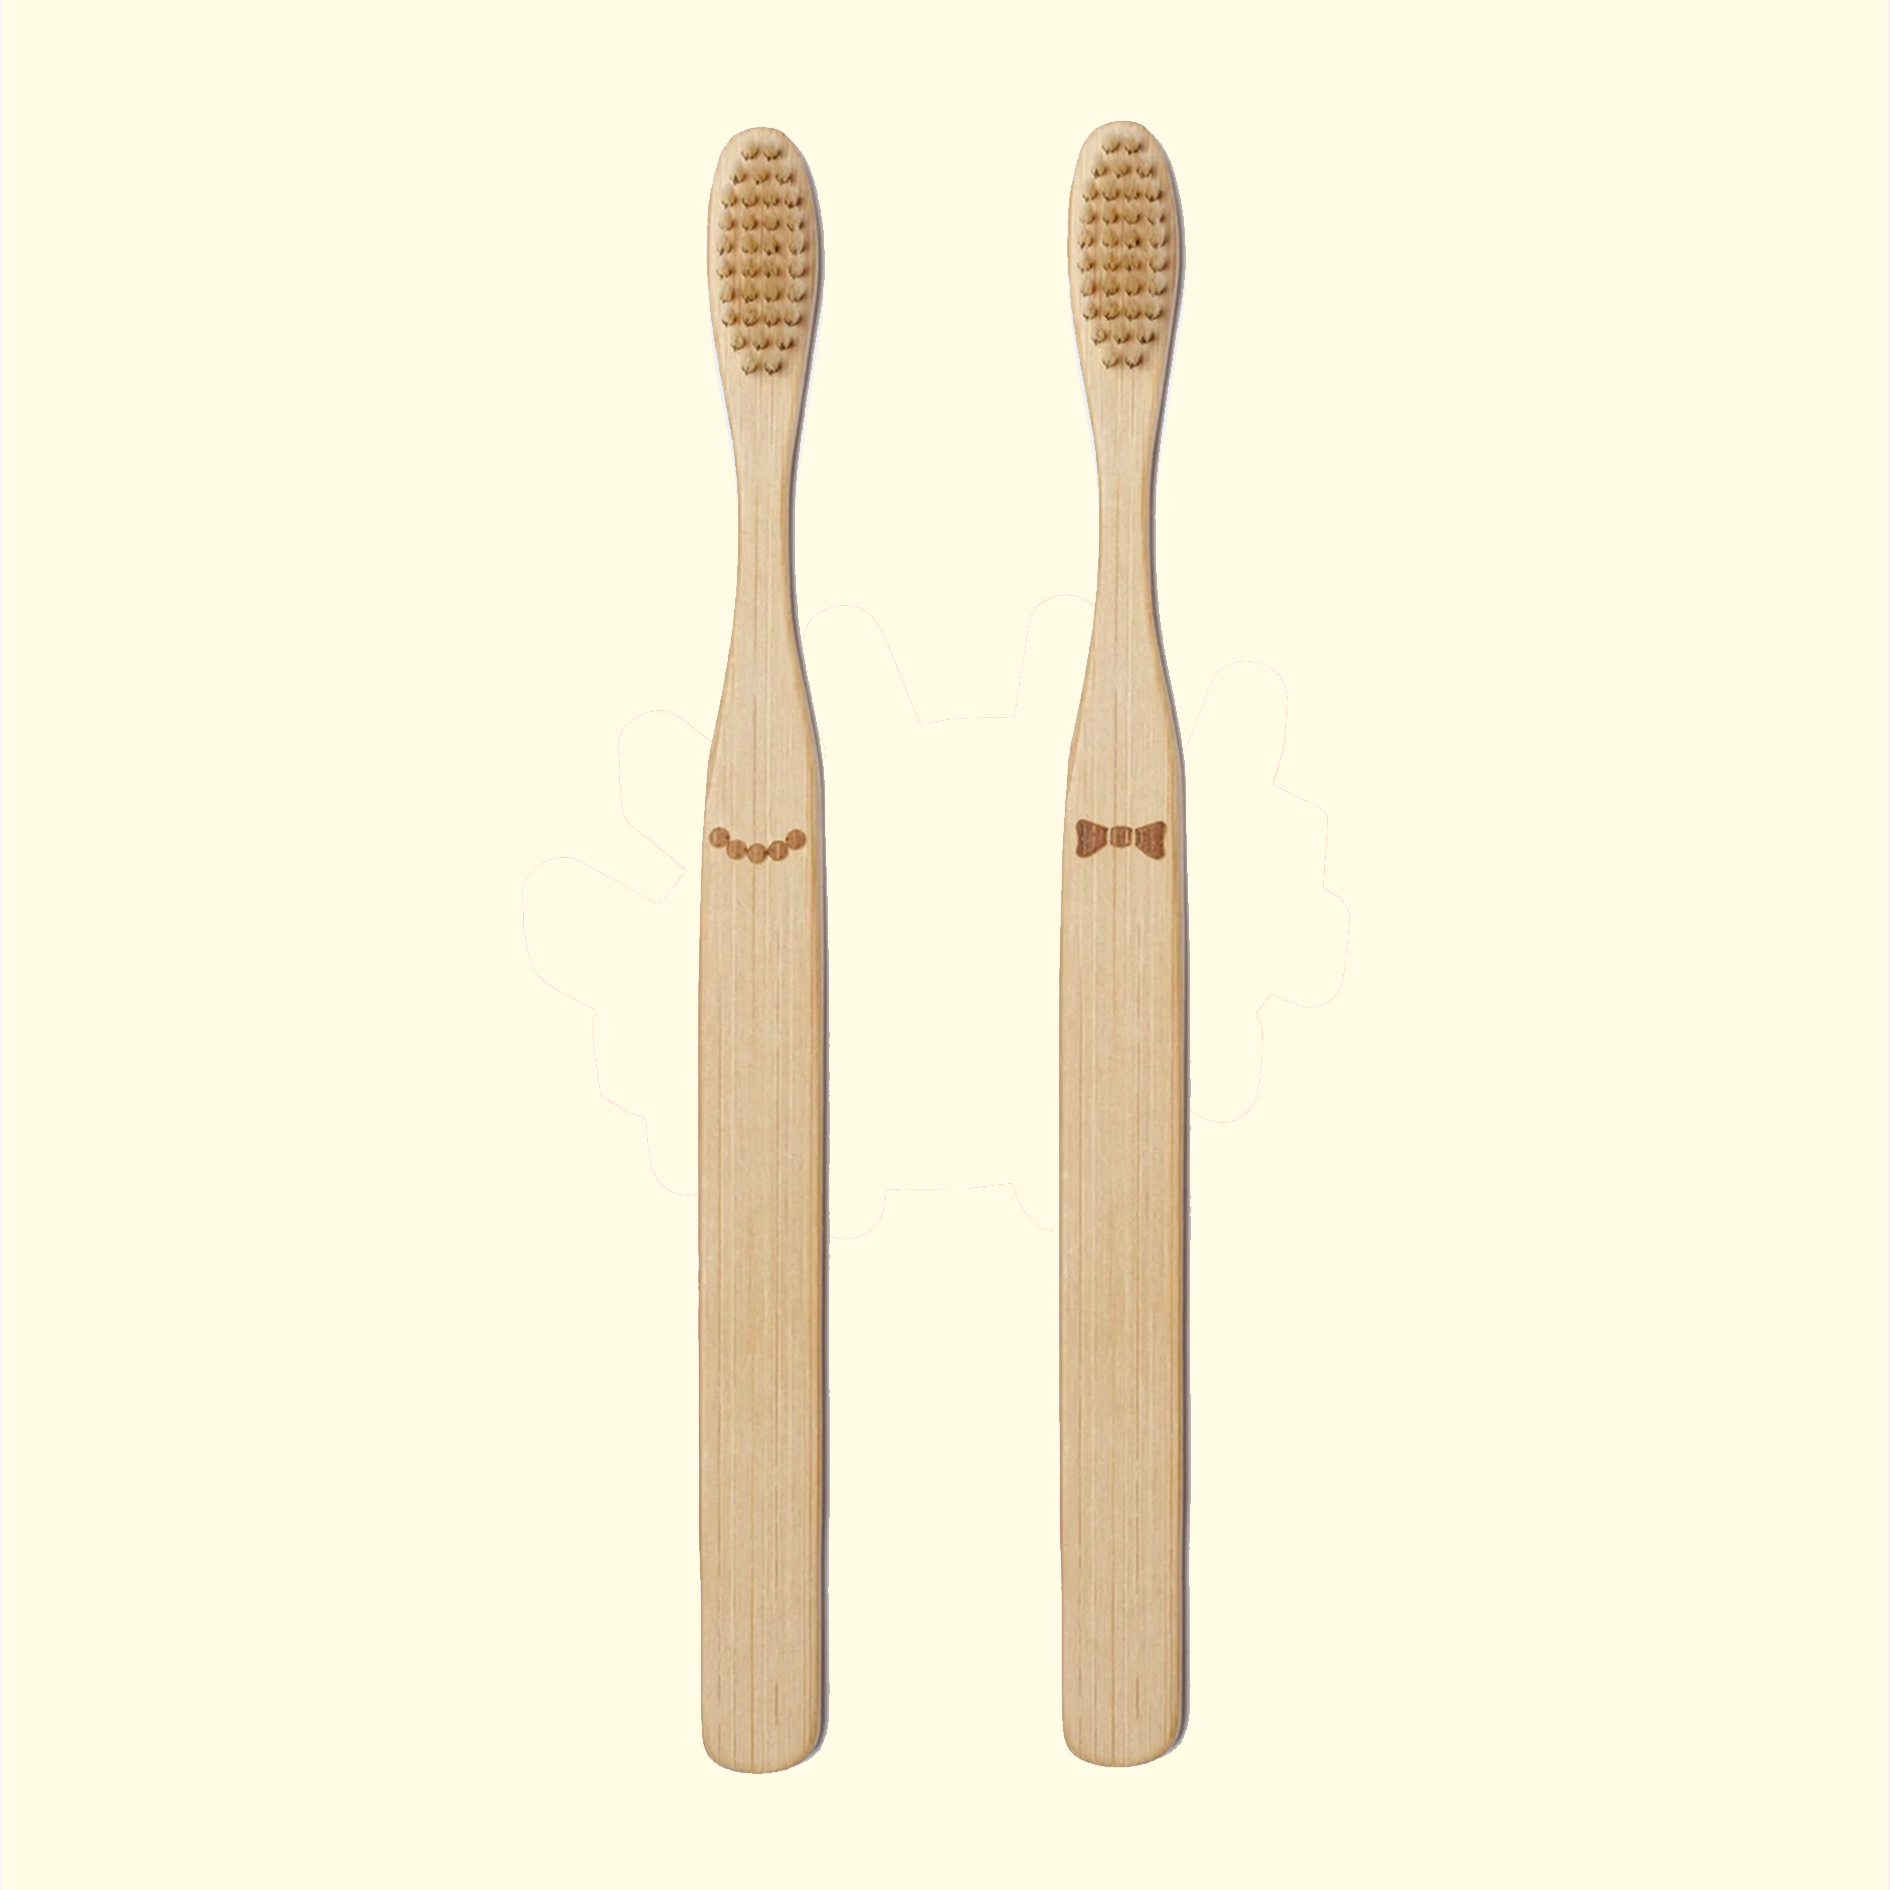 Hers & His Bamboo Toothbrush Set